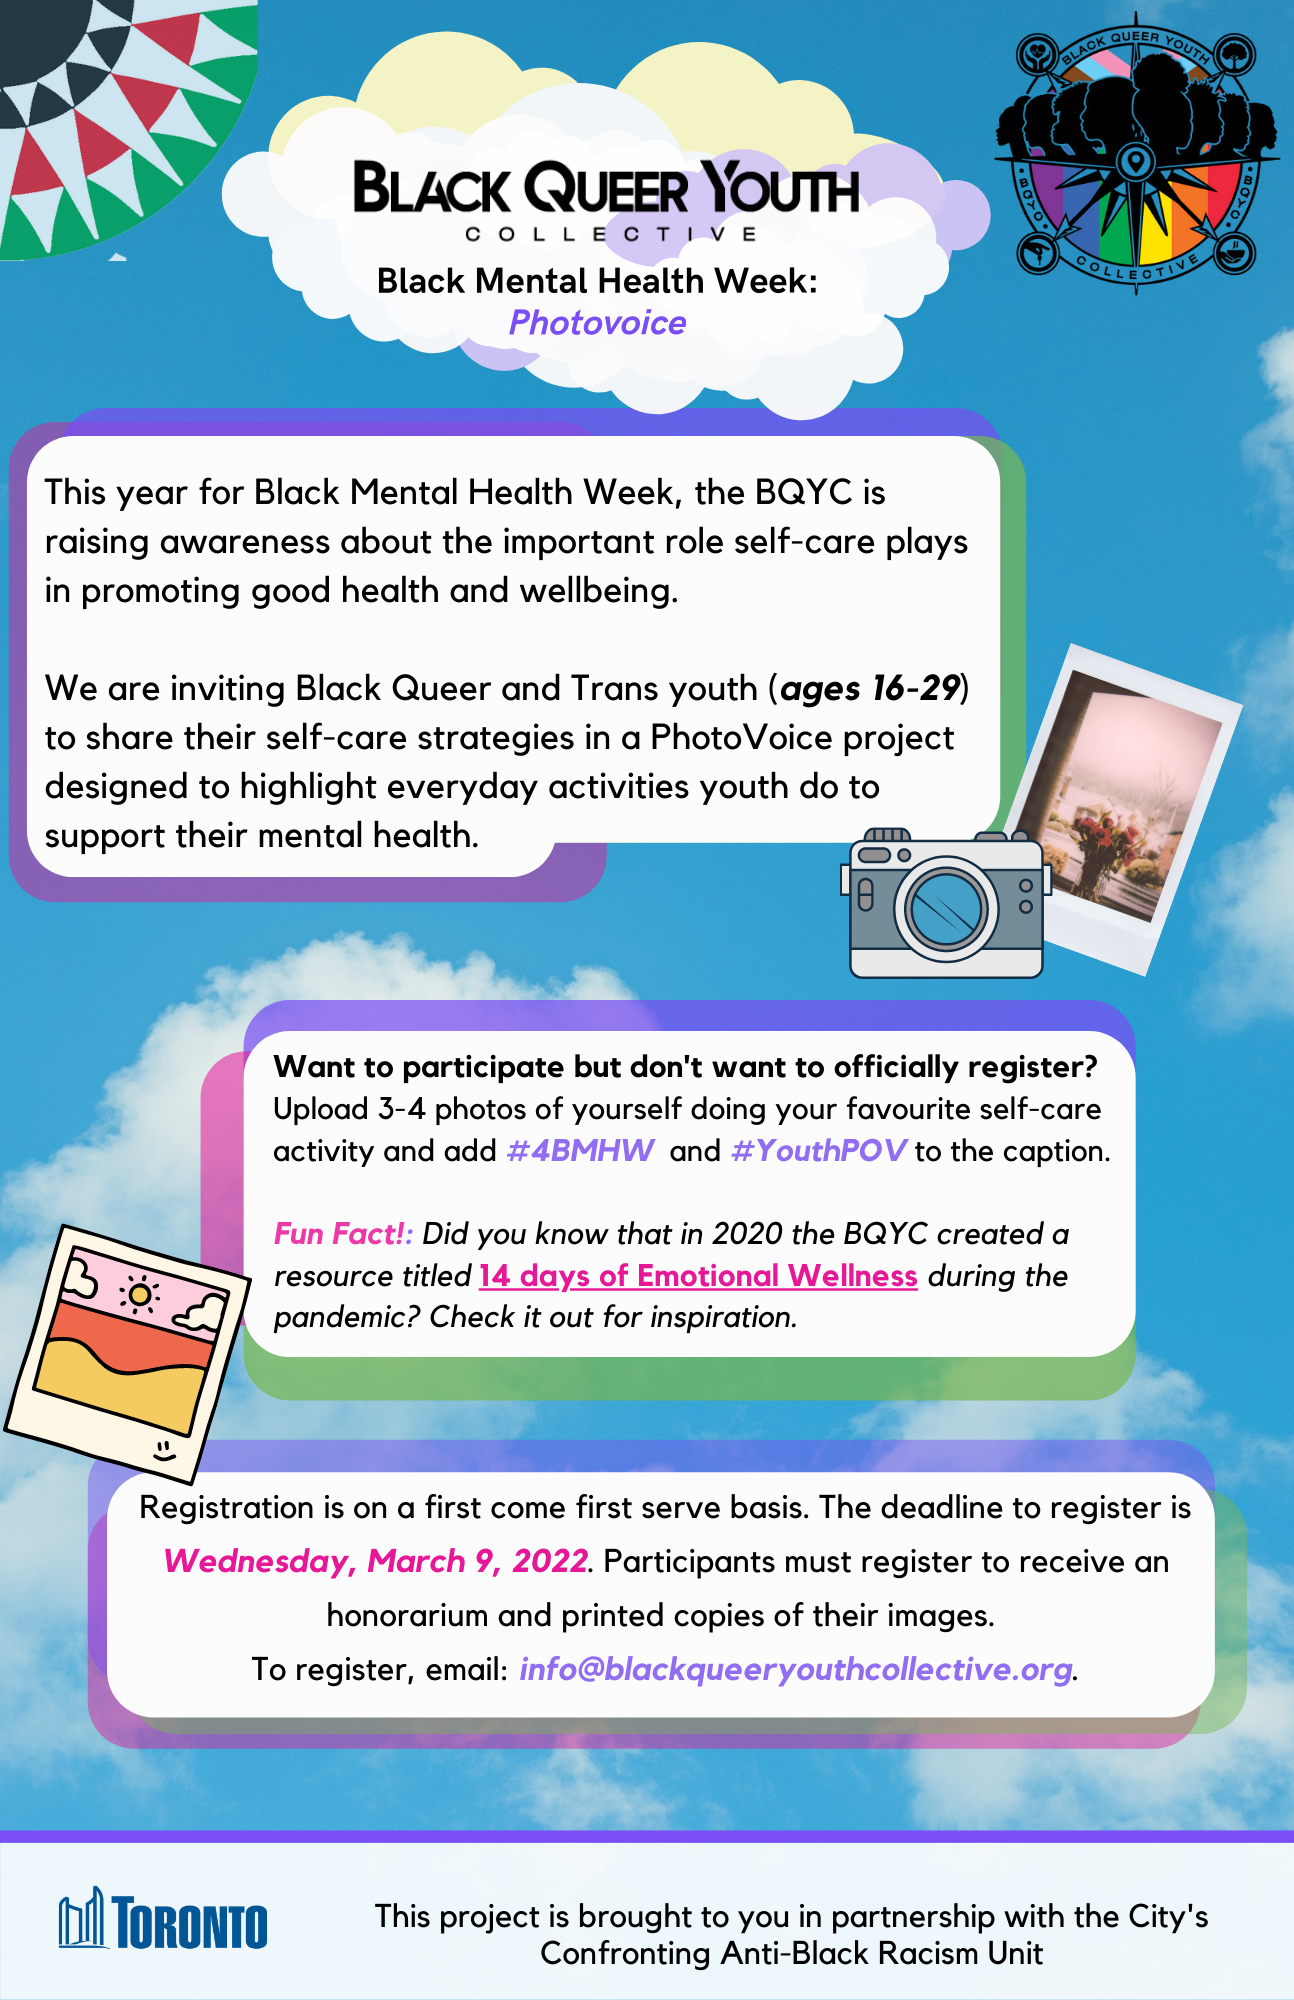 BQYC is raising awareness about the important role Self-care plays in promoting good health and wellbeing.